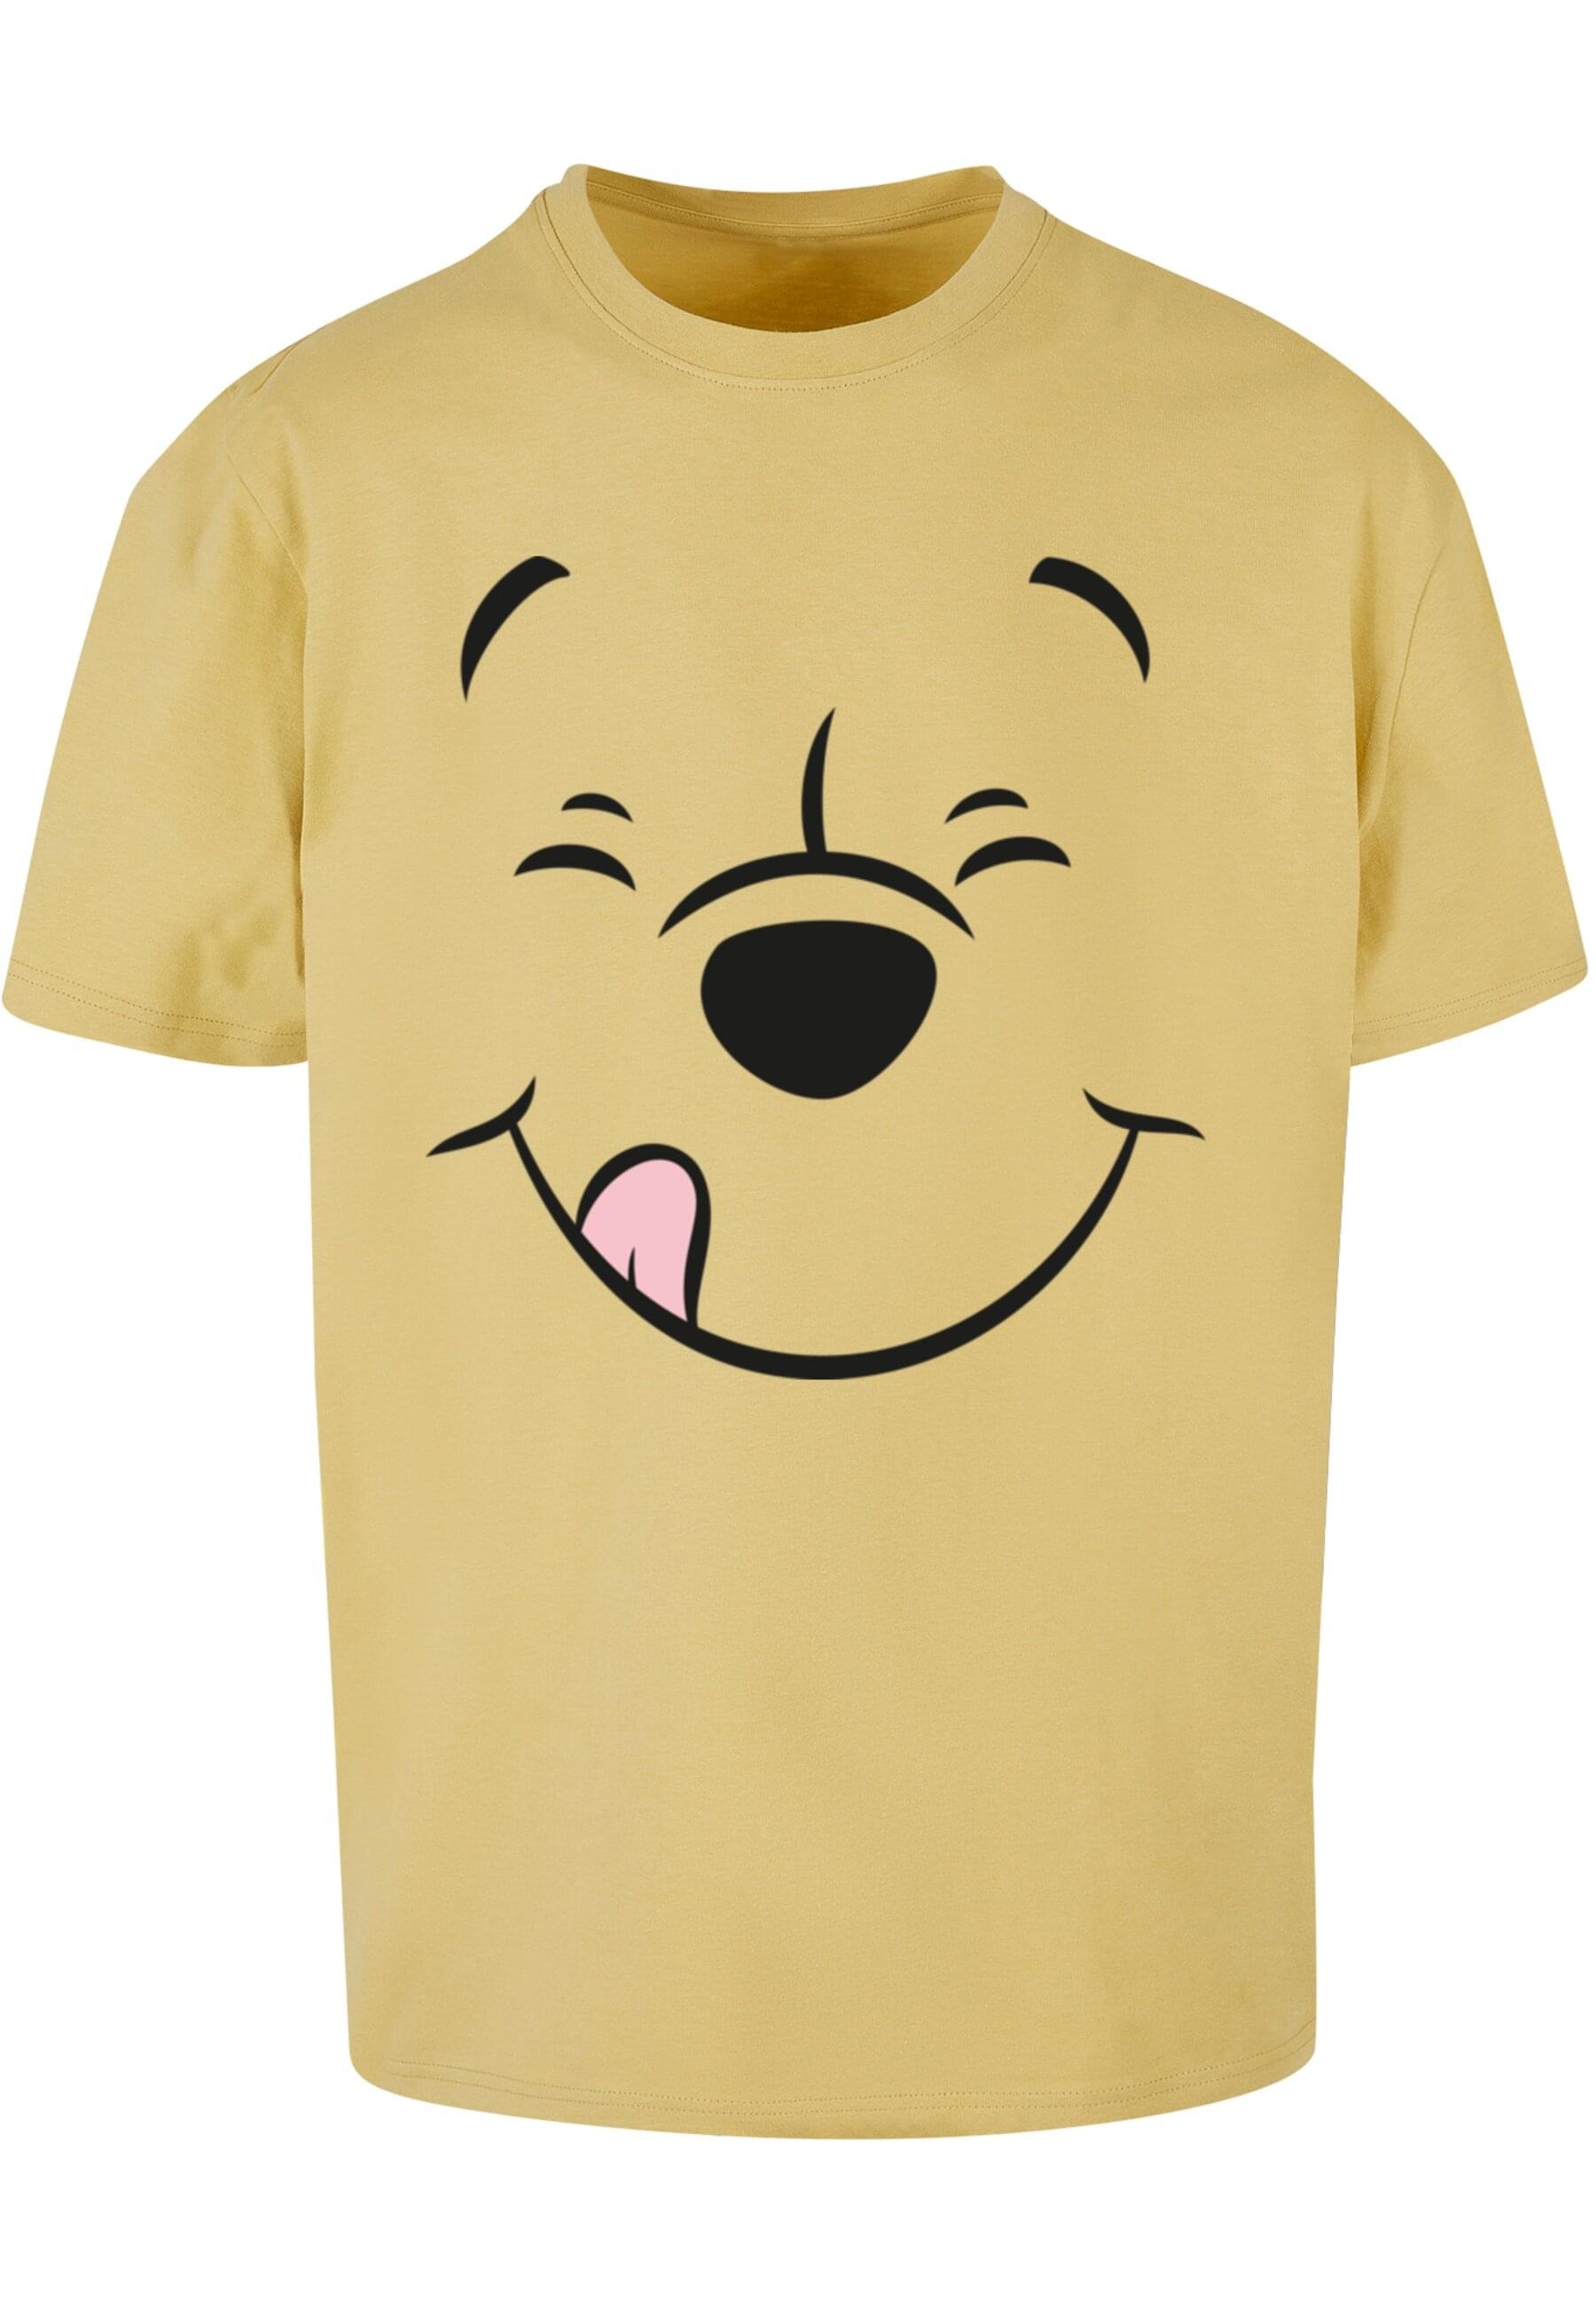 Upscale by Mister Tee T-Shirt »Upscale by Mister Tee Herren Disney 100 Winnie Pooh Face Tee«, (1 tlg.)